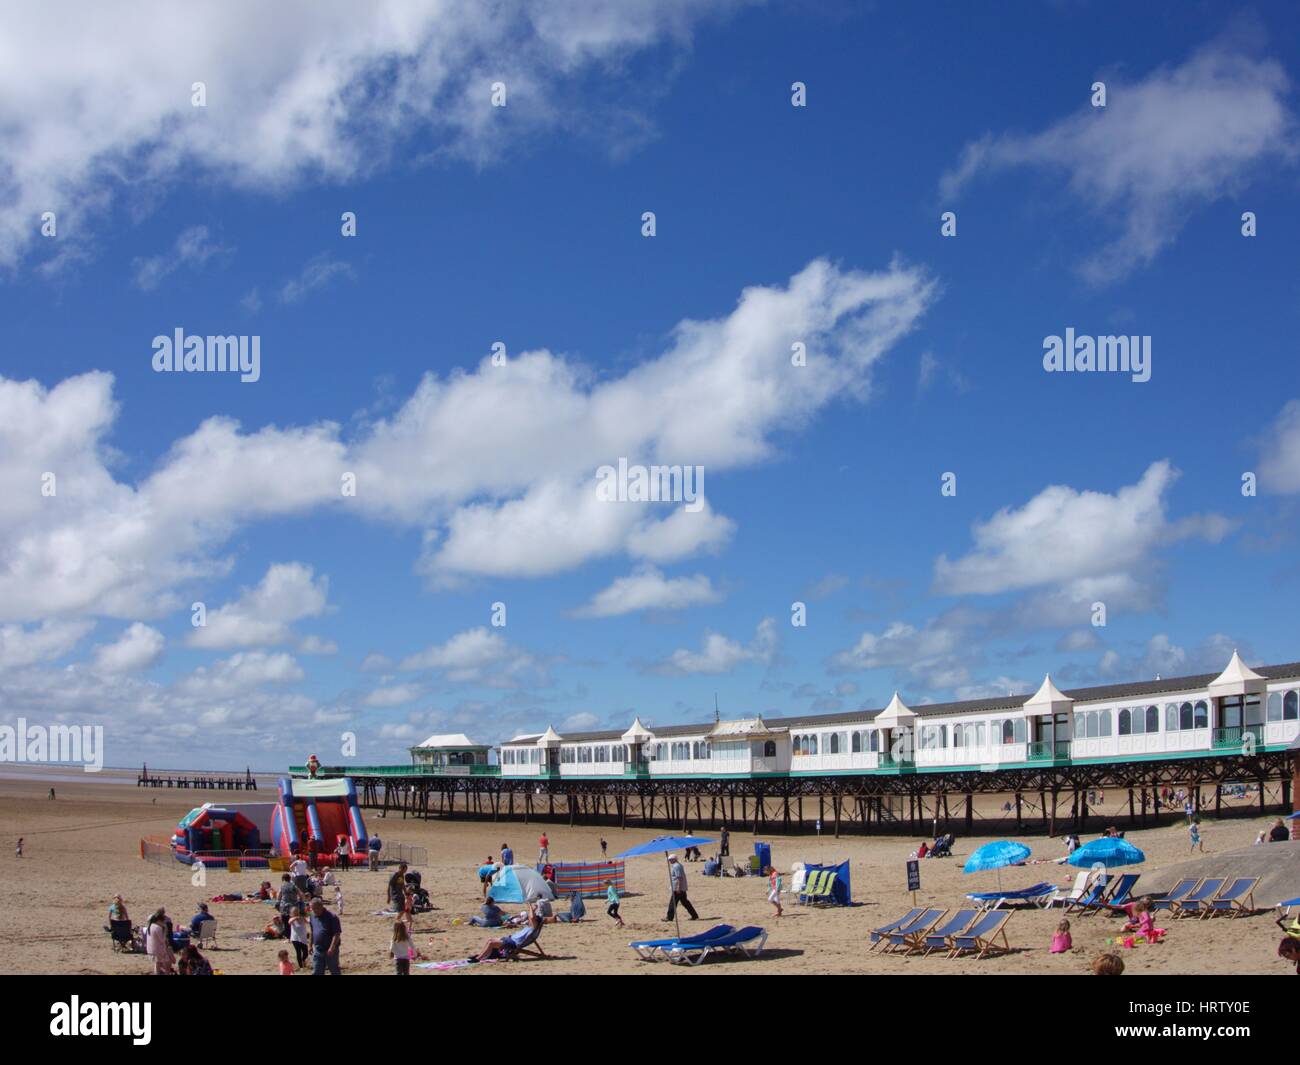 St Anne's pier and beach Stock Photo